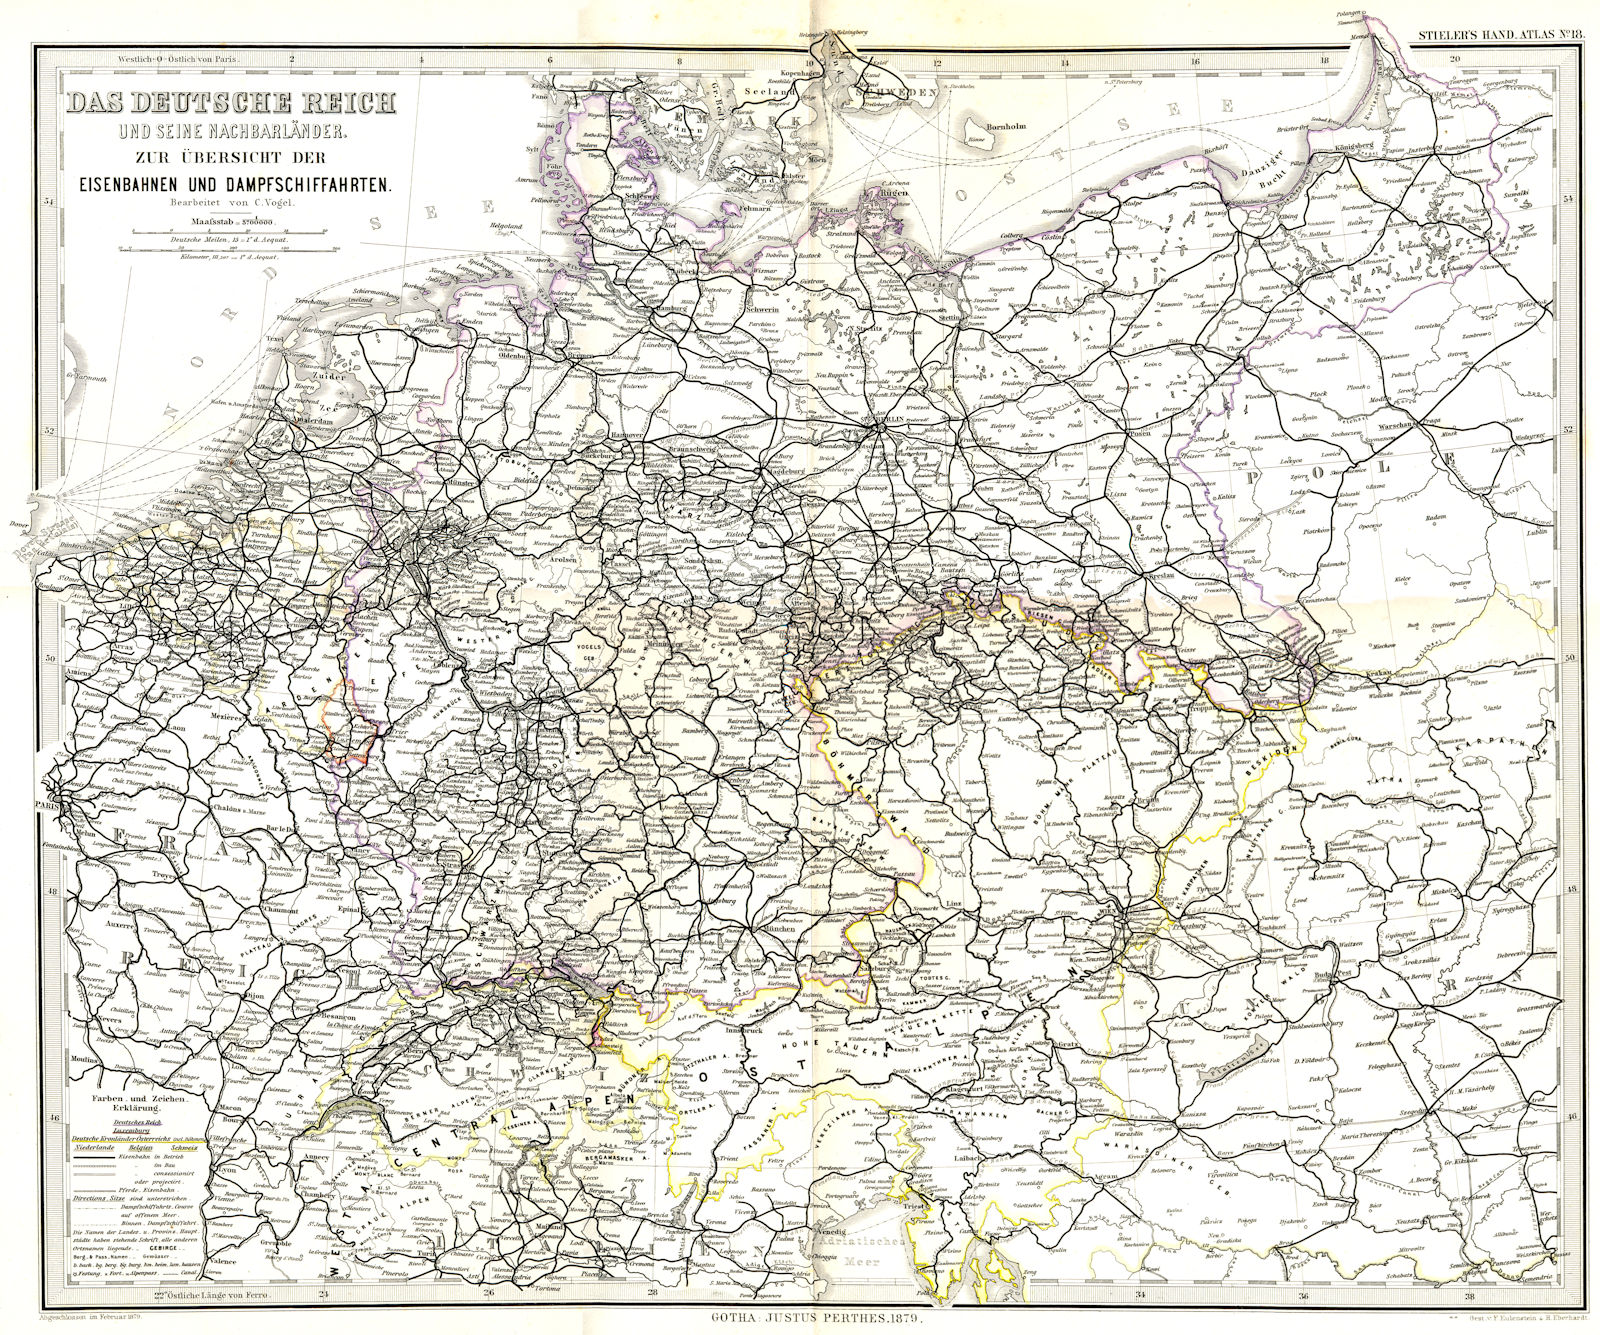 Associate Product CENTRAL EUROPE GERMANY. Eisenbahnen Railways 1879 old antique map plan chart